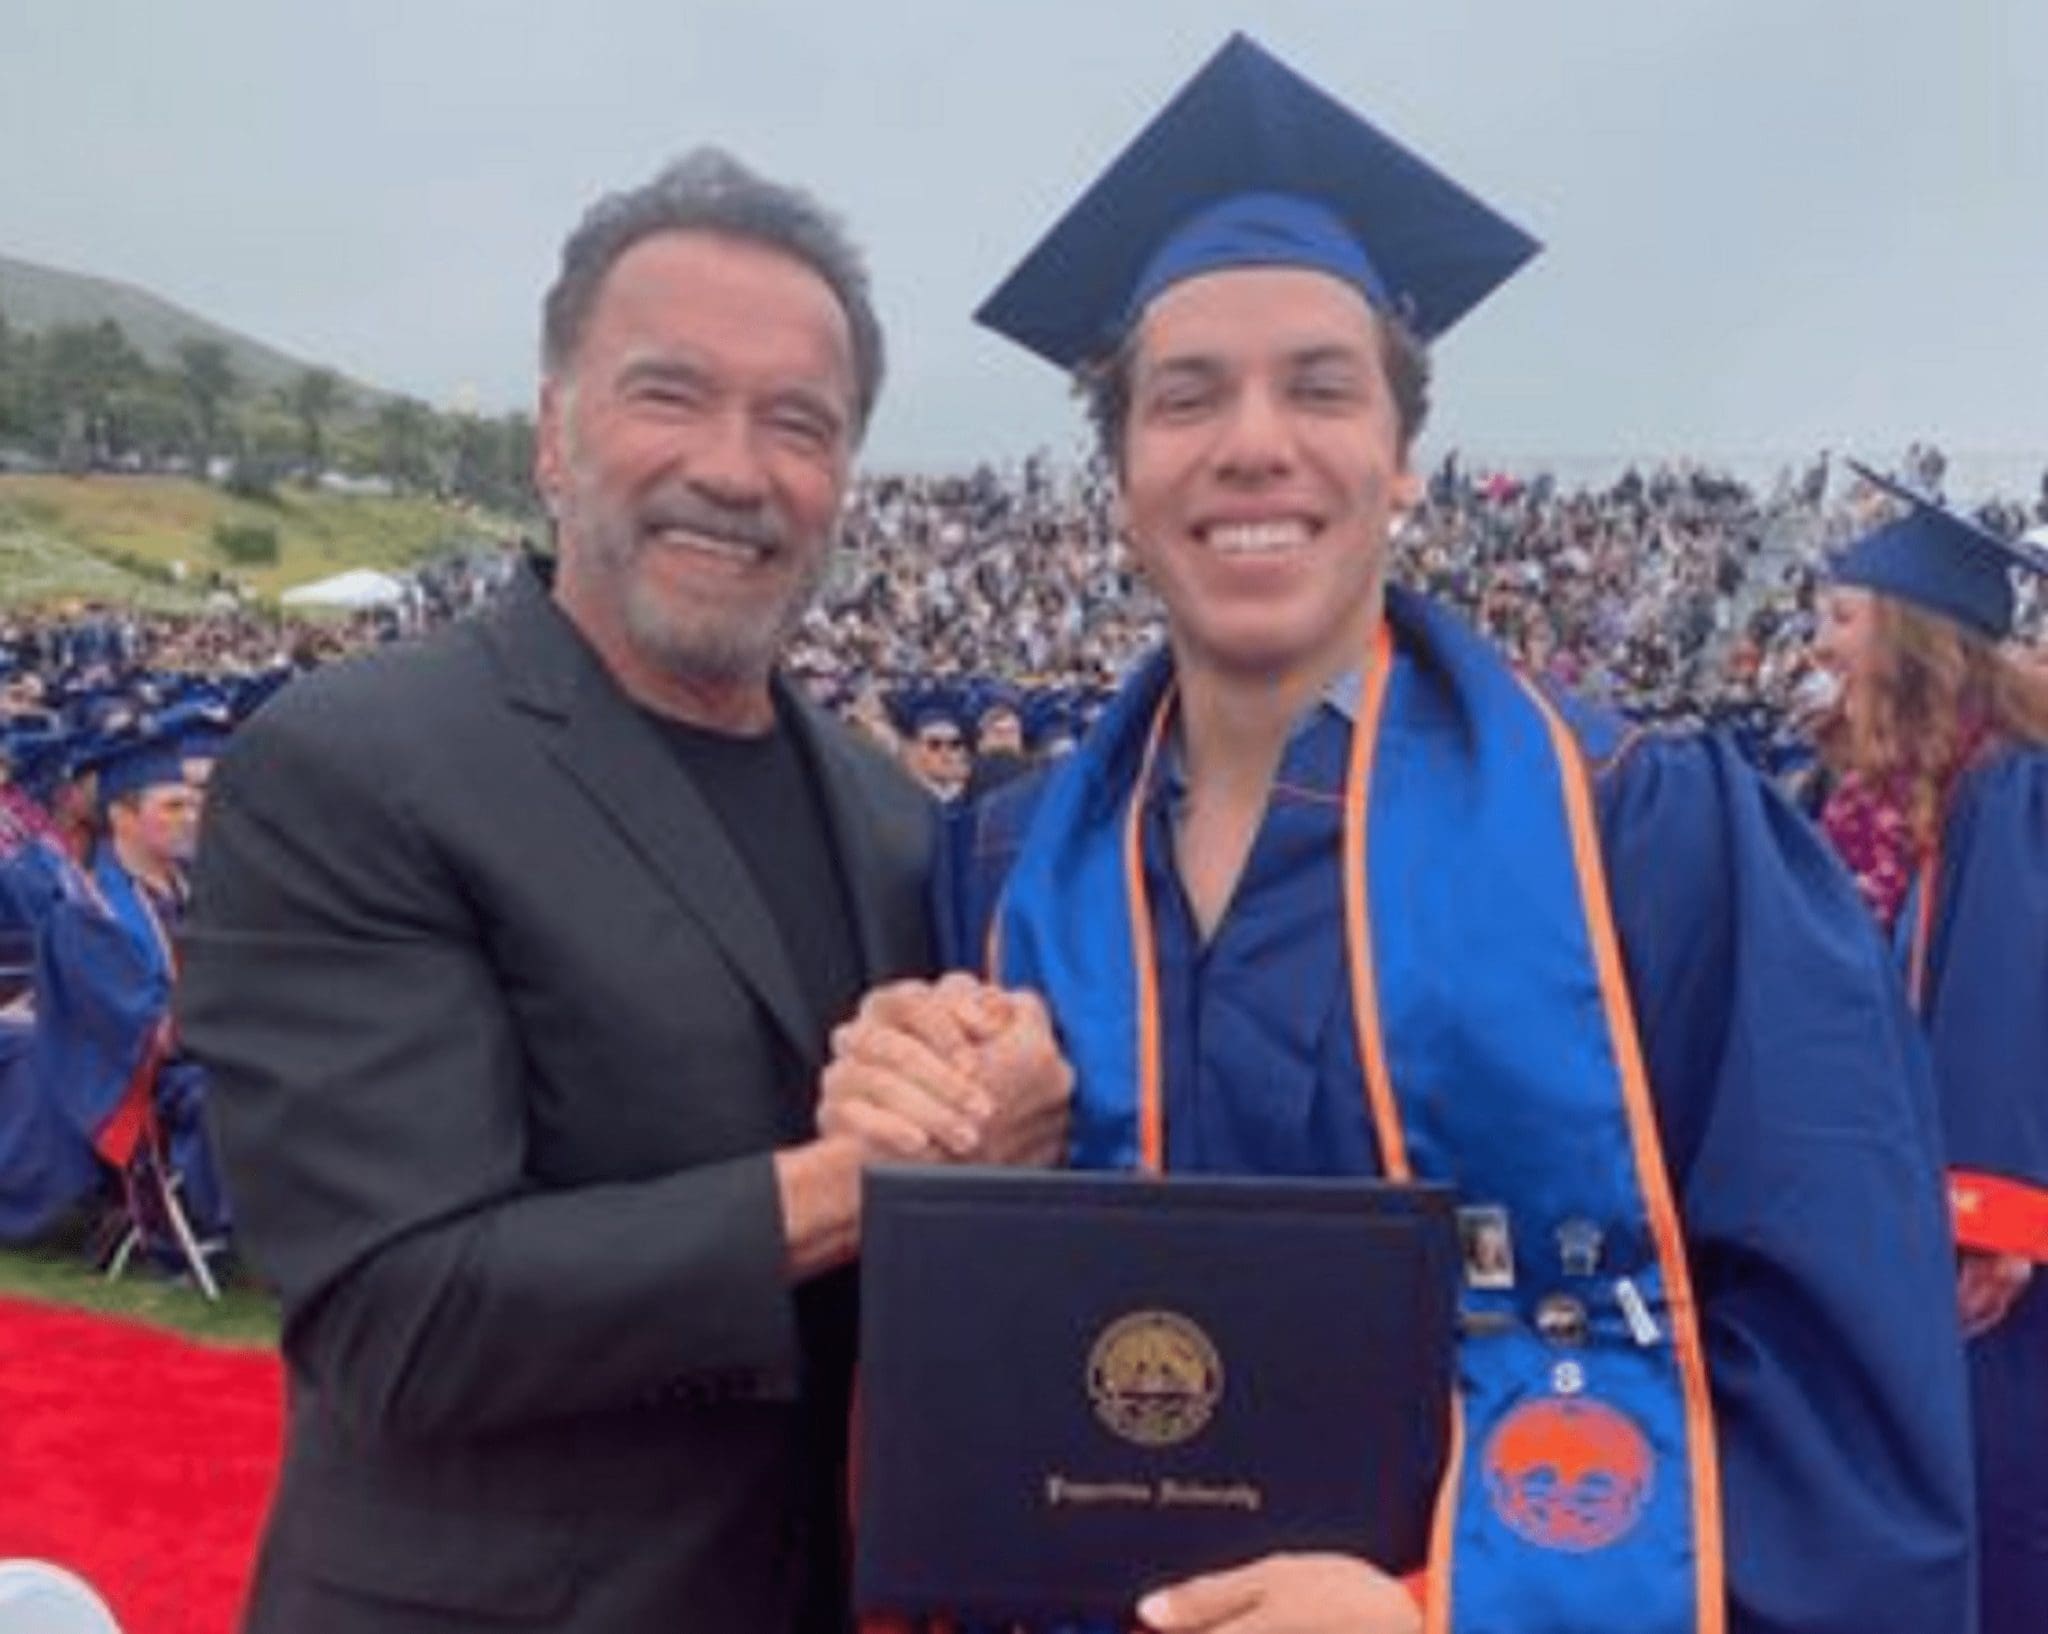 The Son Of Arnold Schwarzenegger, Joseph Baena After Graduating From College, Lost His Father's Financial Aid-And Became A Real Estate Agent